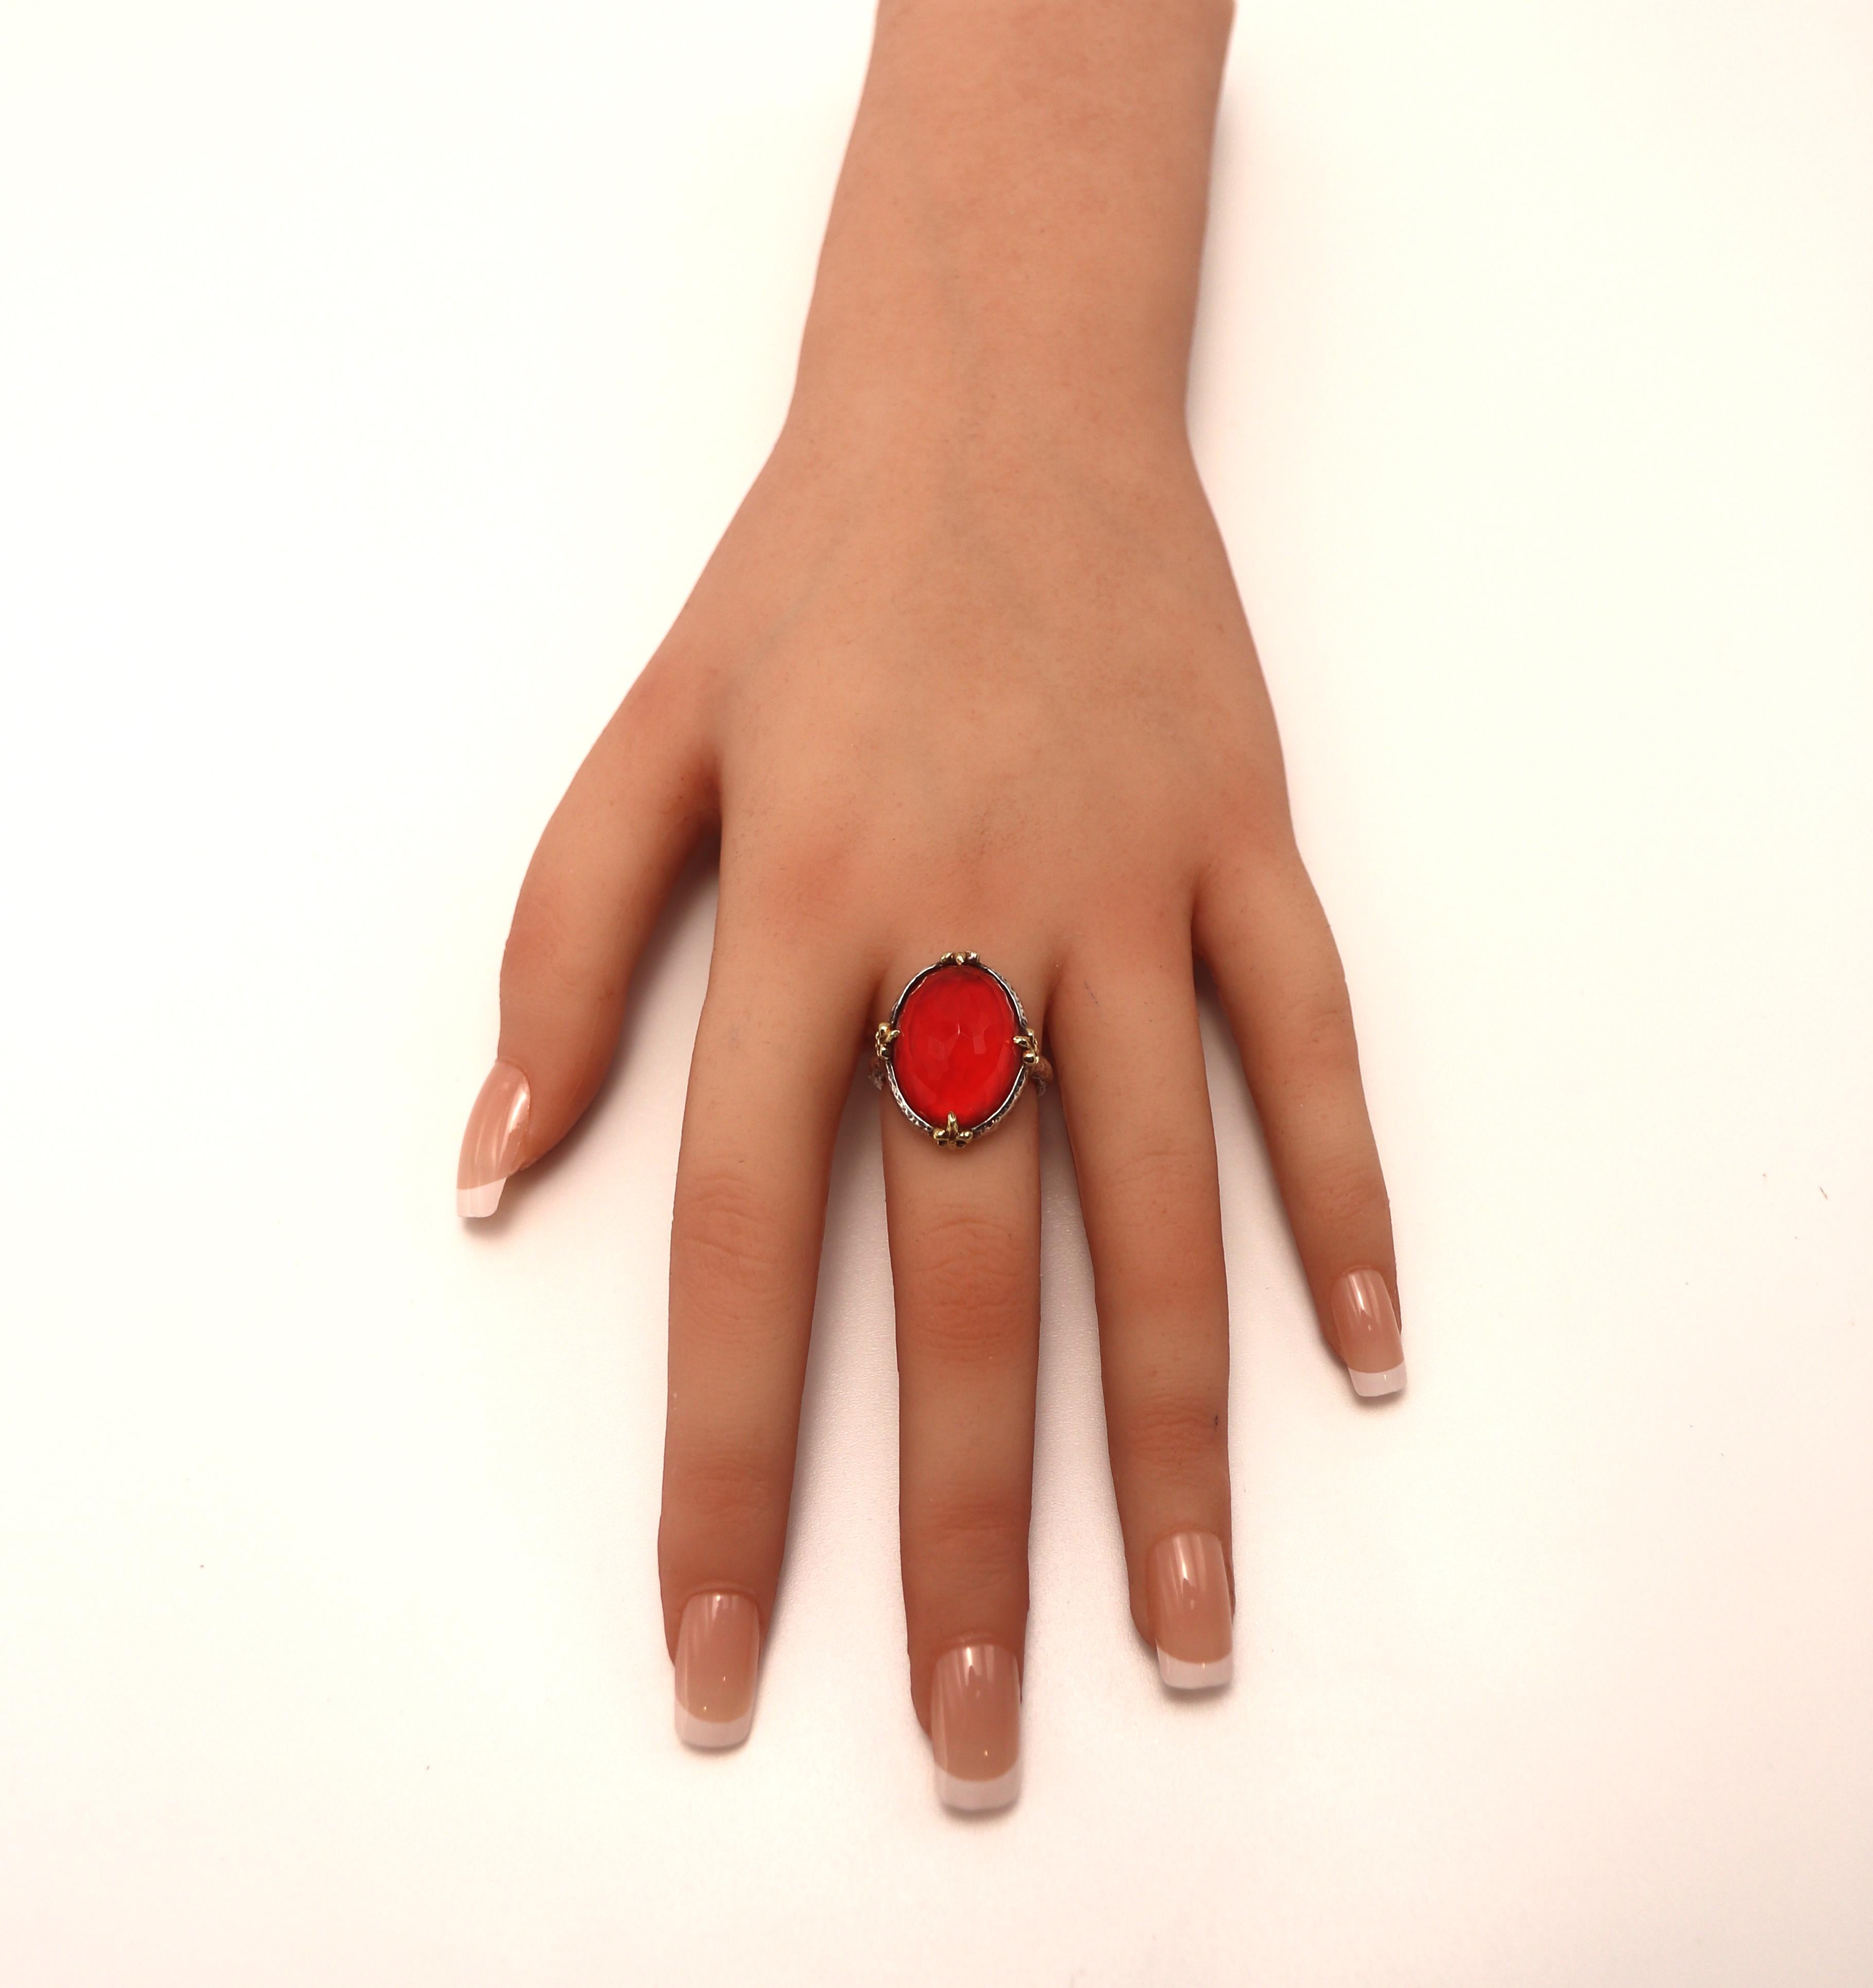 Tony McCabe Handmade Red Cocktail Ring In Excellent Condition For Sale In Stamford, CT